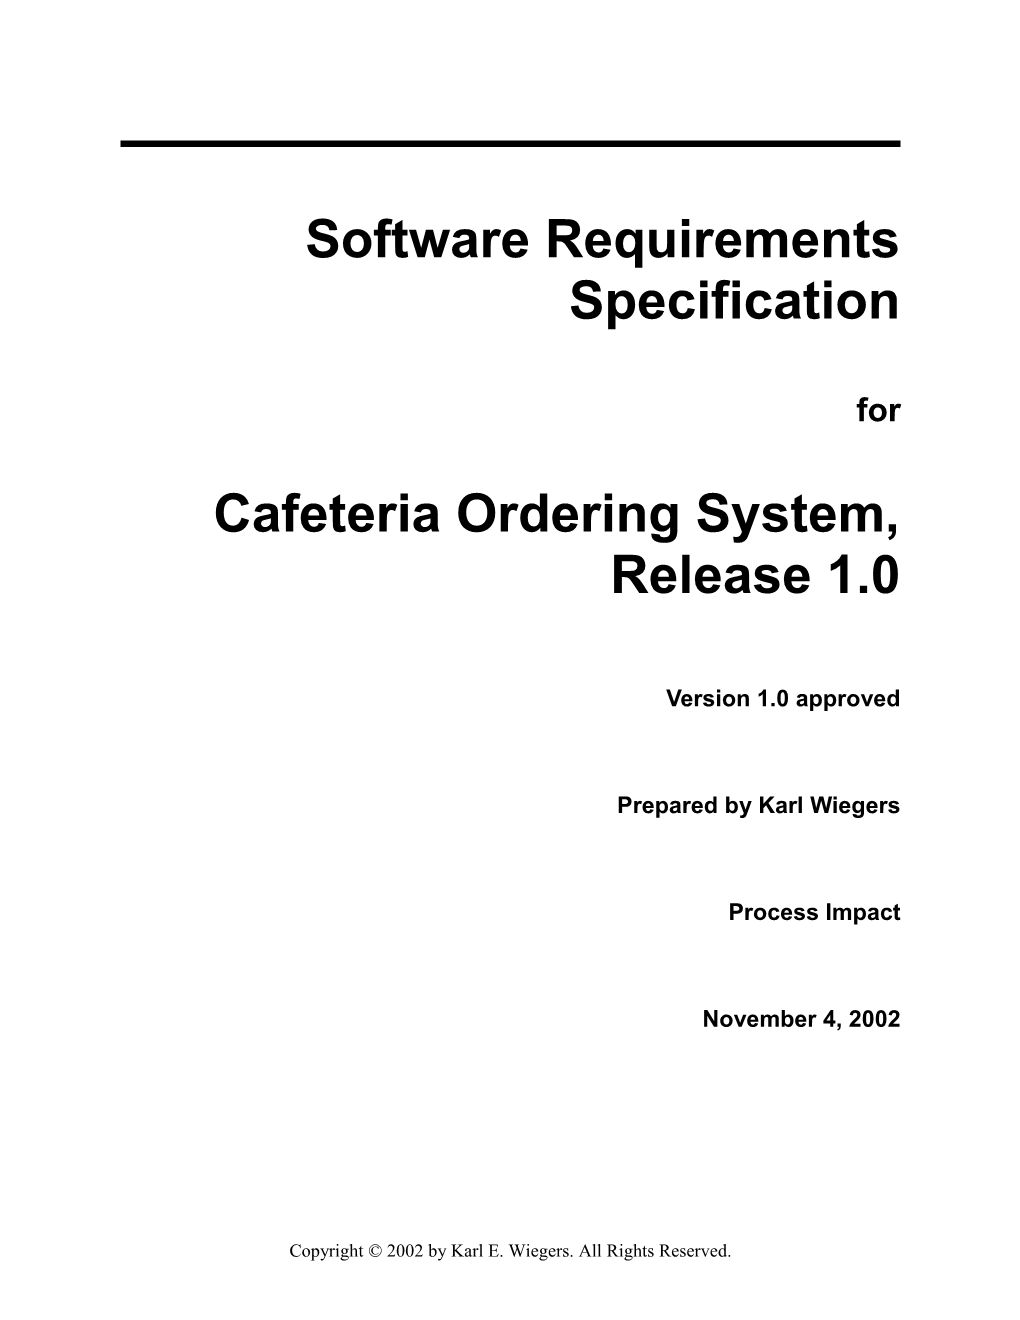 SRS for Cafeteria Ordering System